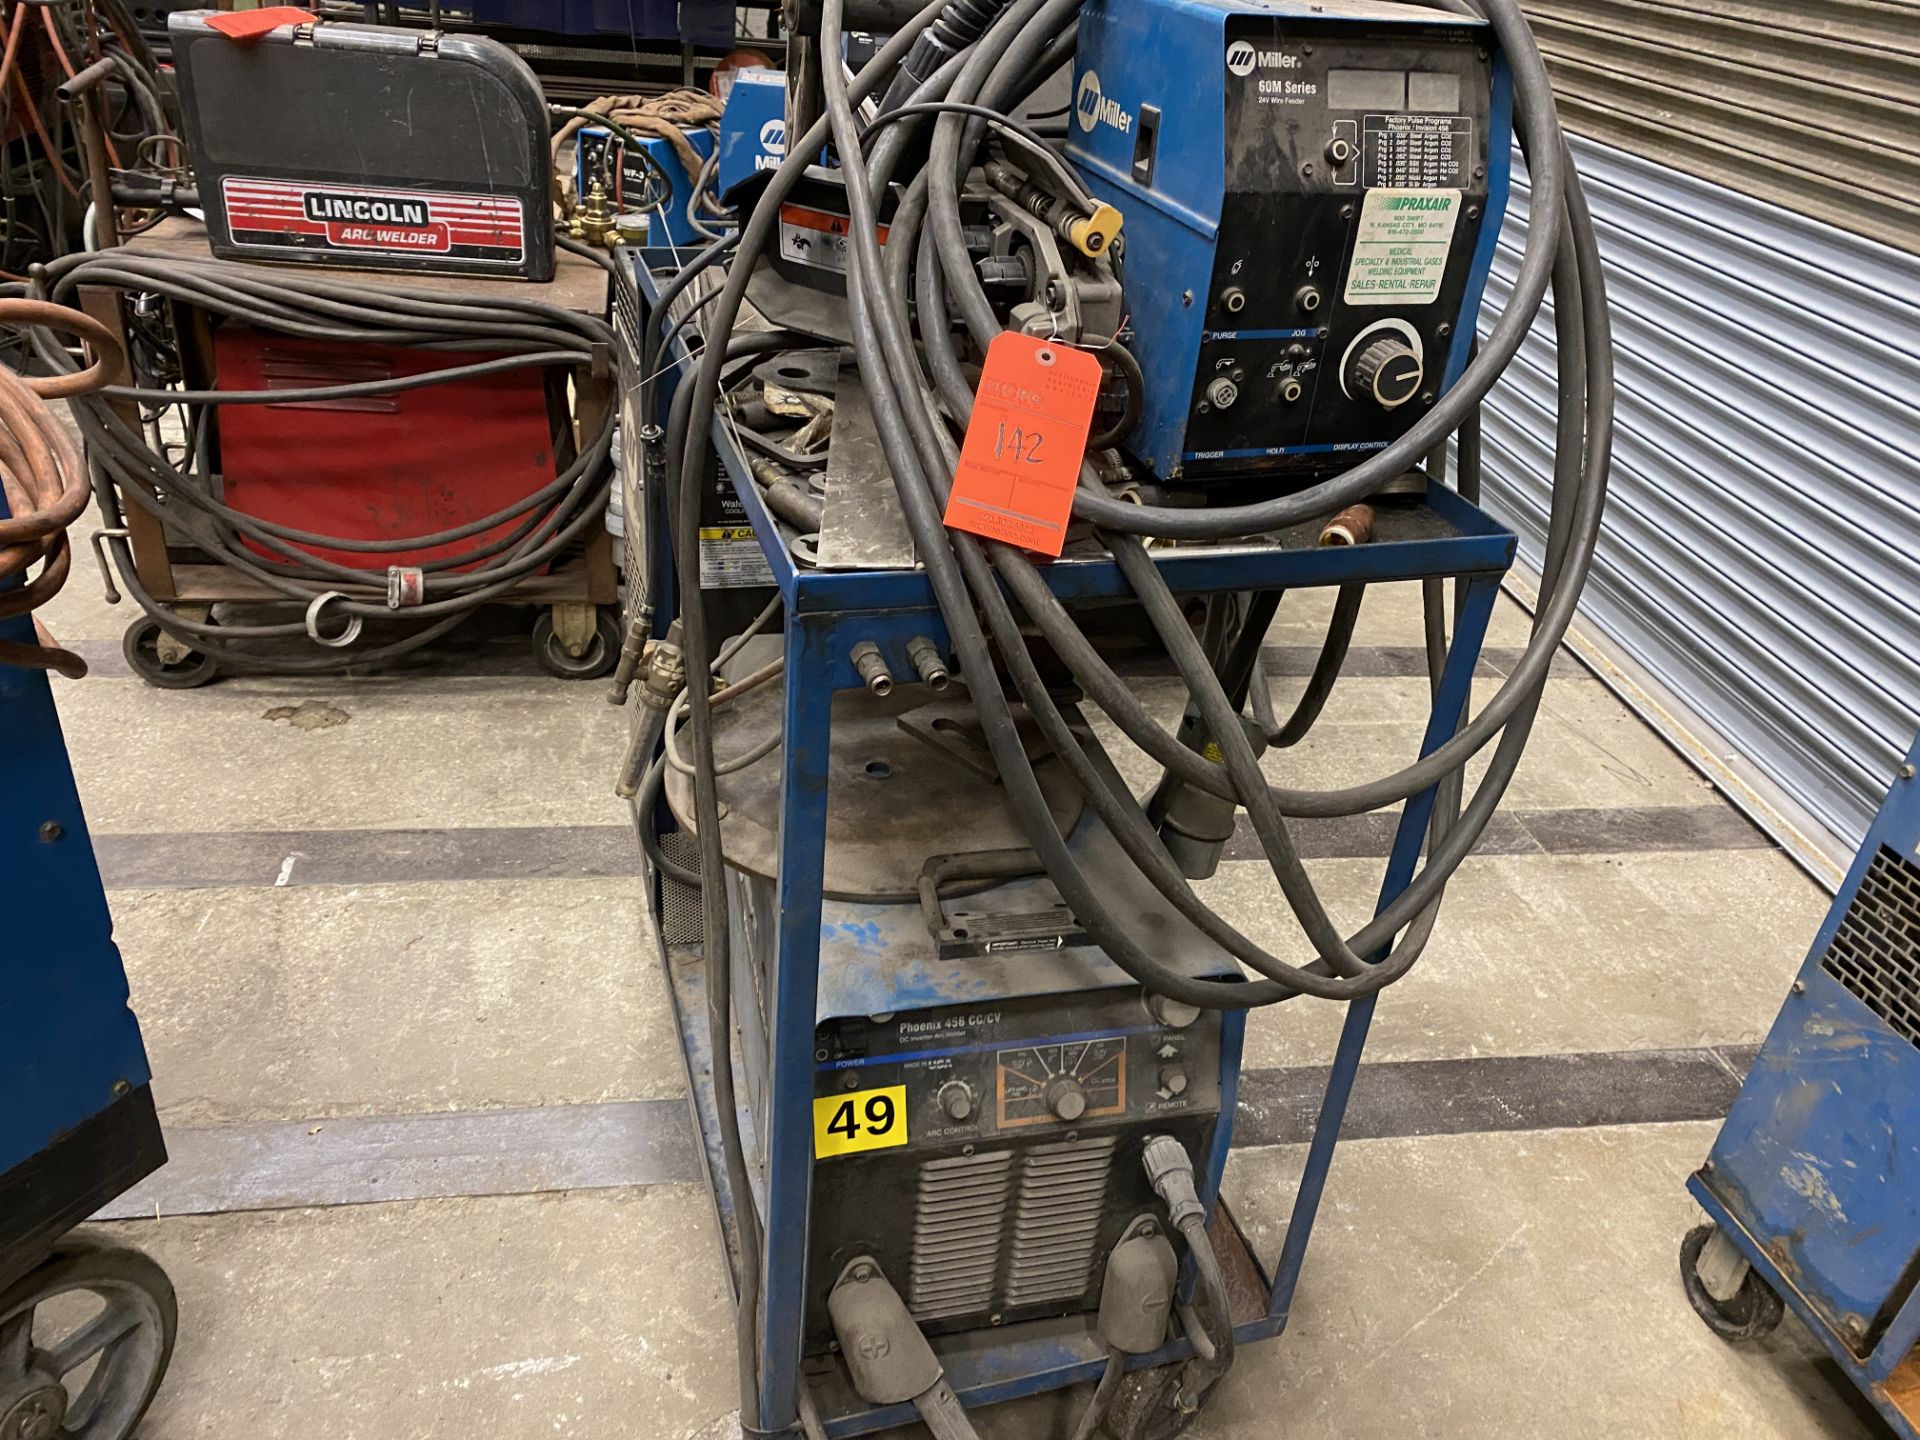 Miller Phoenix 456 CC/CV DC arc welder SN KH564612 with watermate 1 cold water chiller with XR